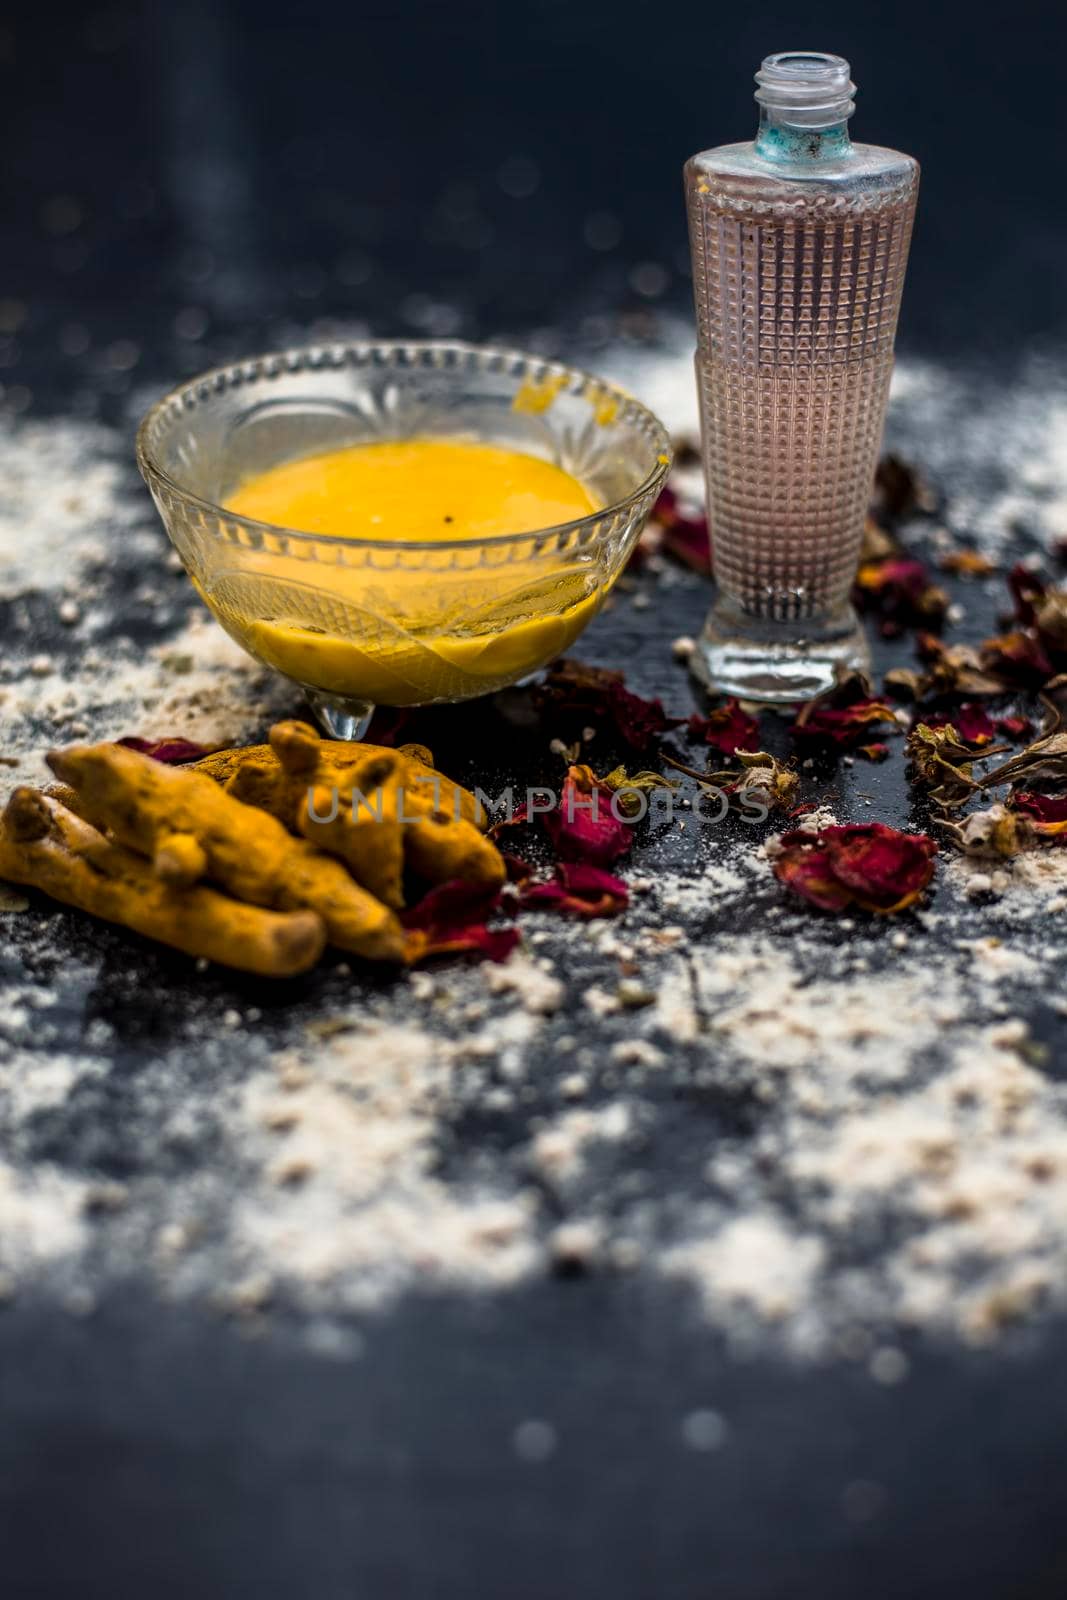 Gram flour or chickpea flour well mixed with turmeric using rose water in a glass bowl and making gram flour face mask for maintaining the pH of the skin. by mirzamlk